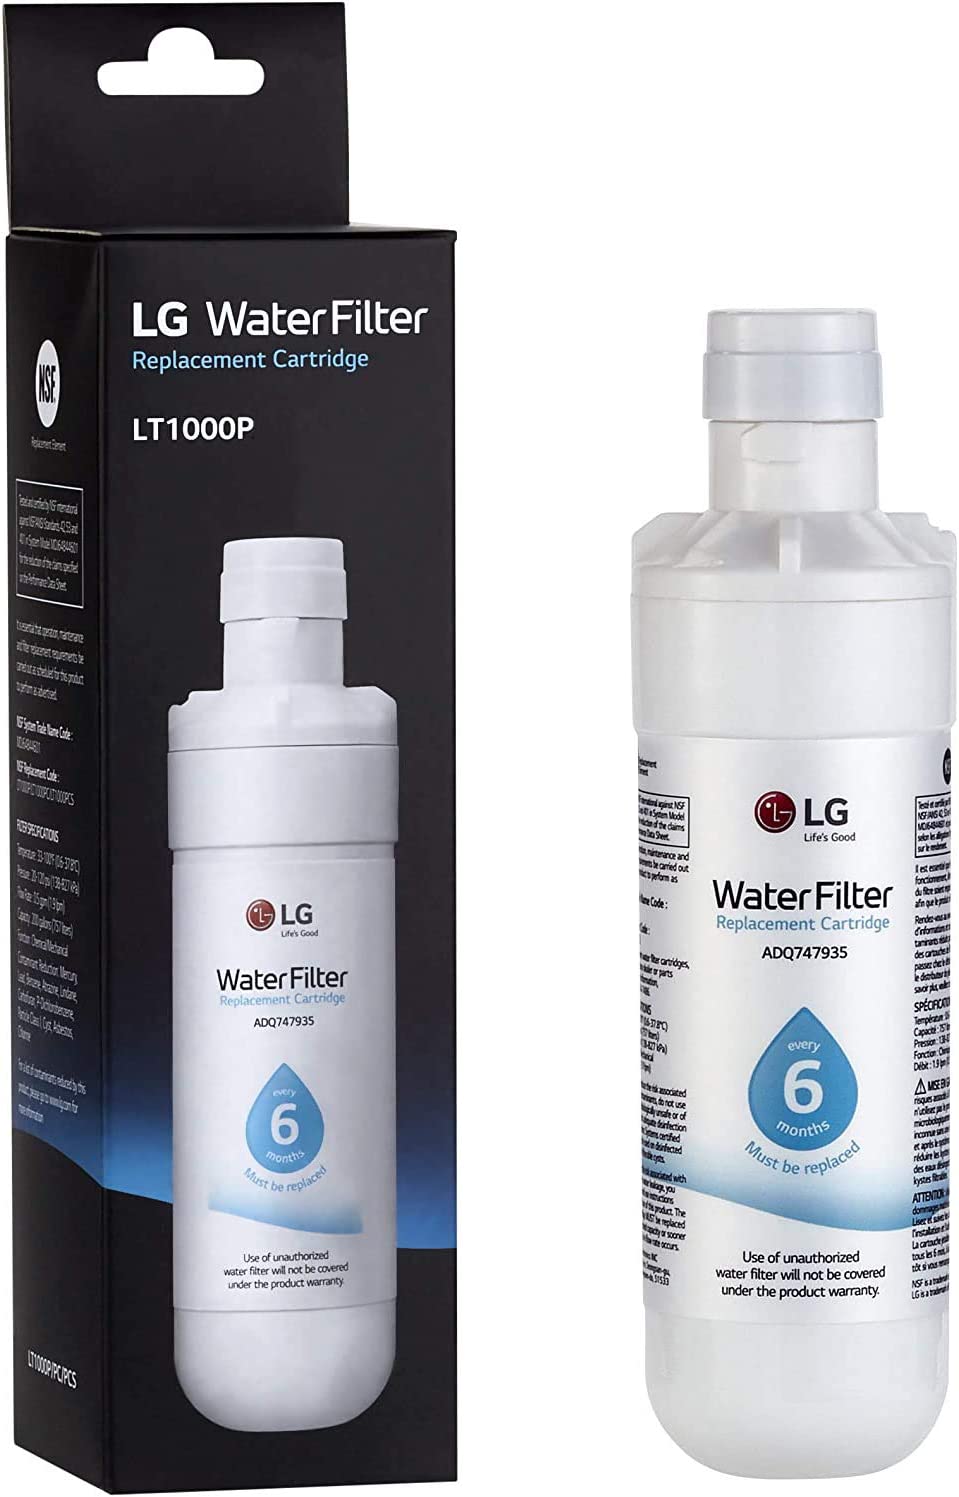 Everything You Need to Know About LG LT1000P Refrigerator Water Filter